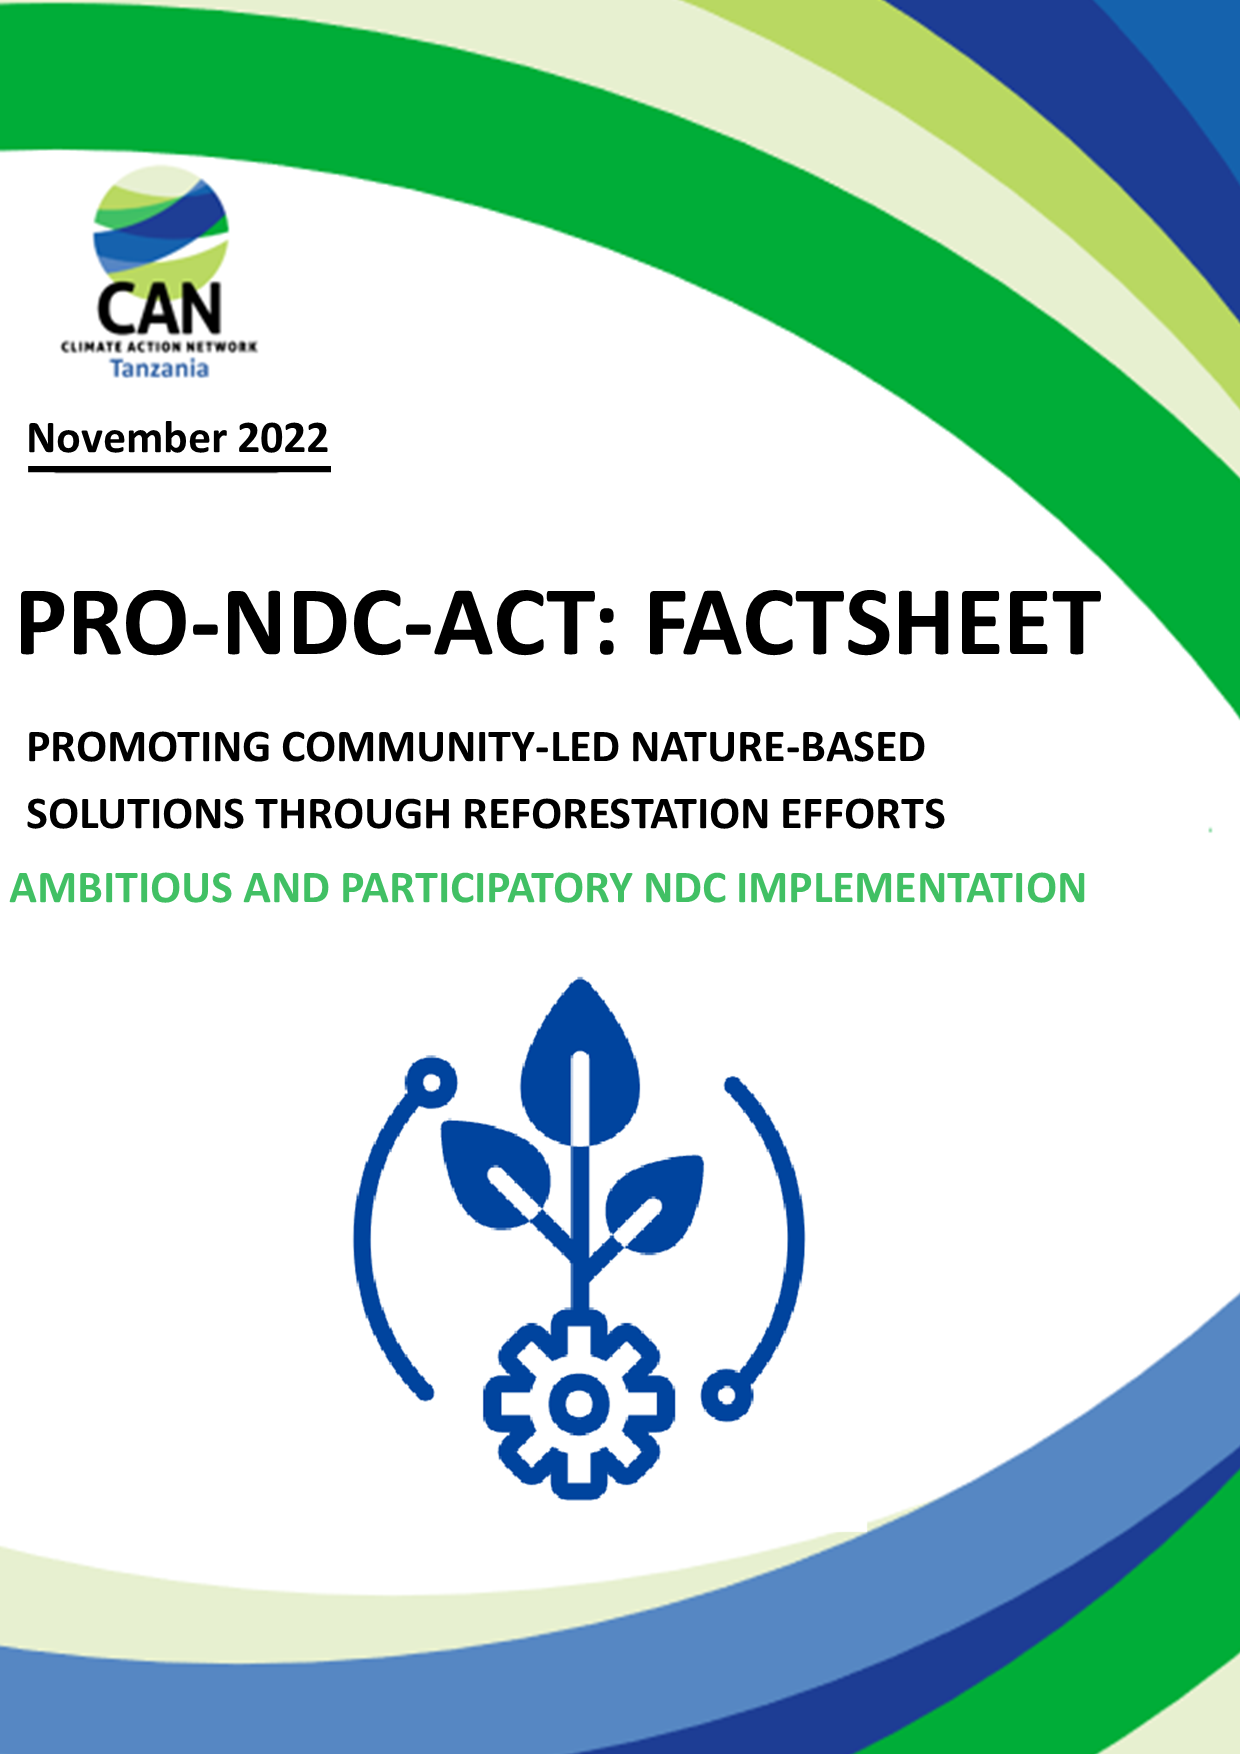 PRO-NDC-ACT Factsheet - Promoting Community-Led Nature-Based Solutions in TZ